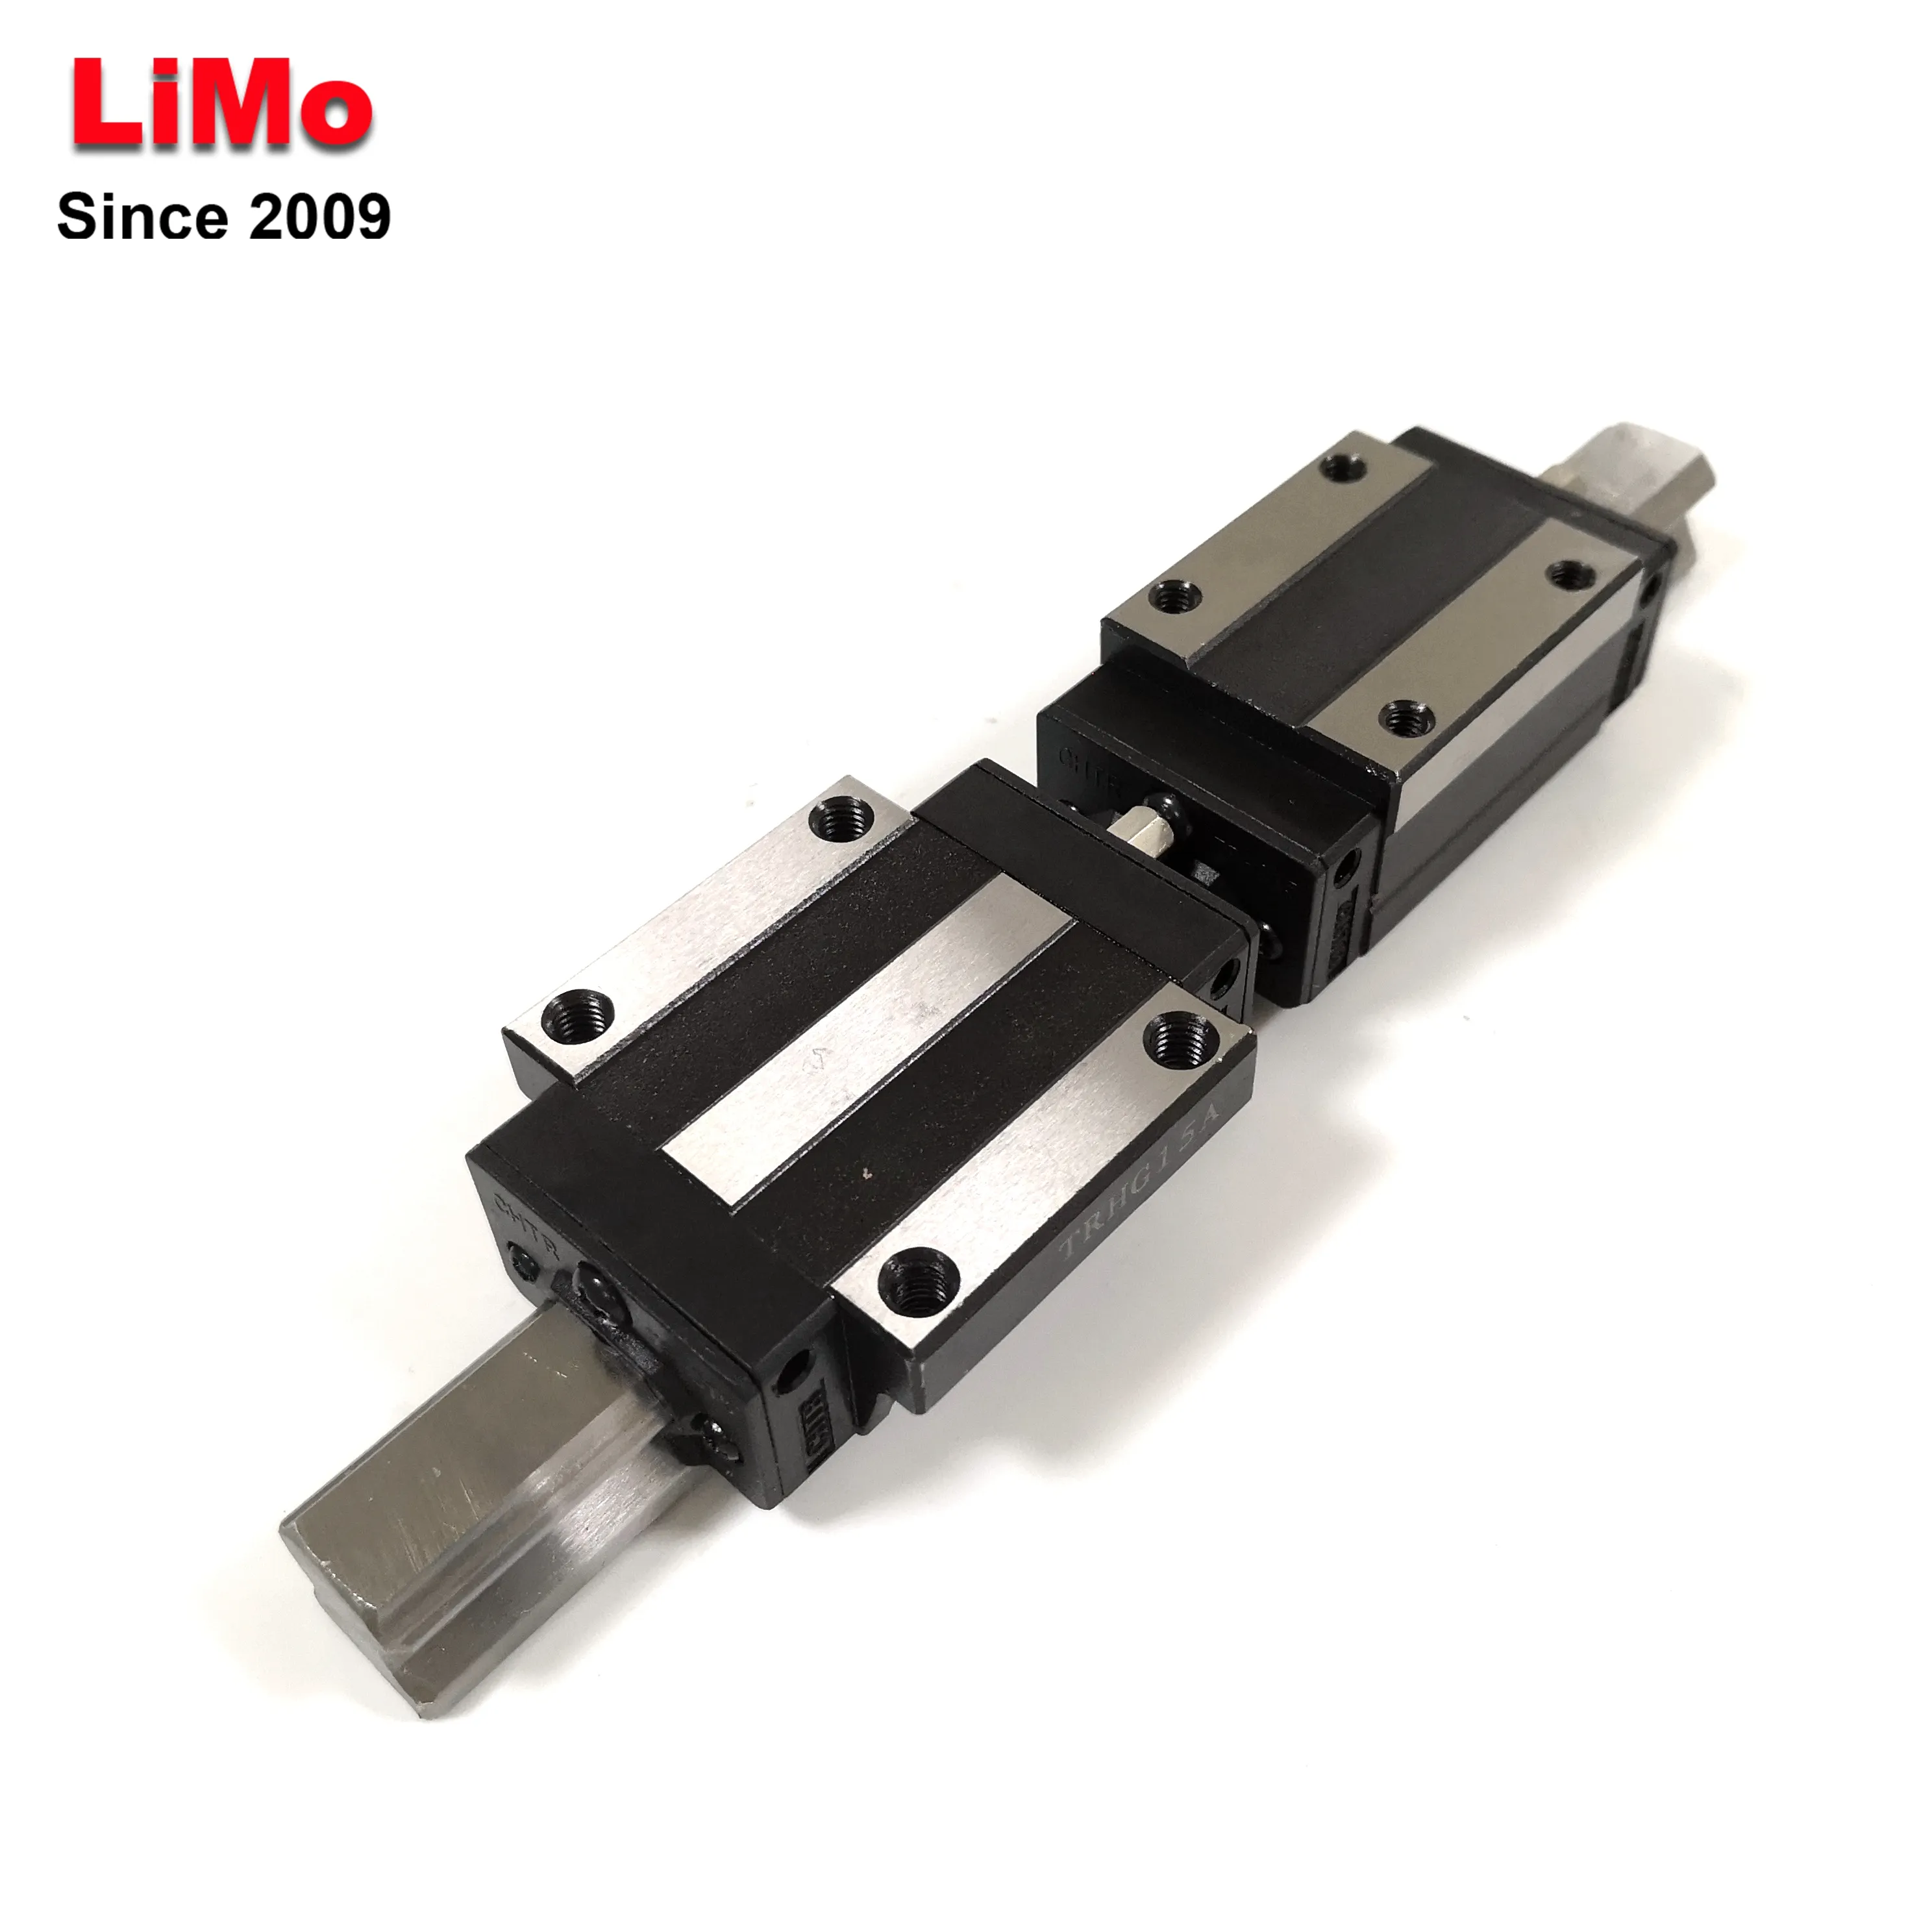 High precision lm guide HG45 for z axis